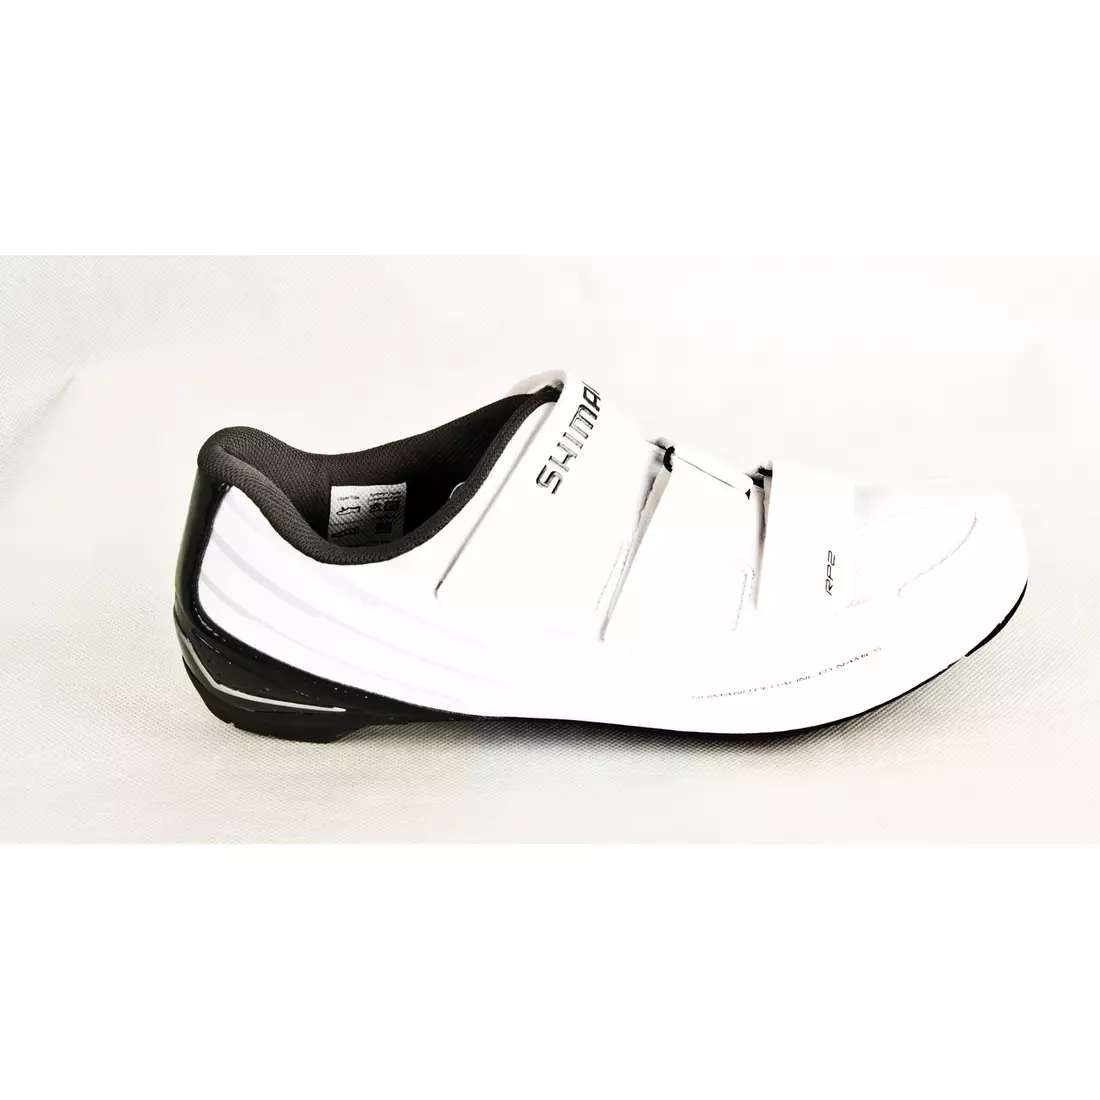 SHIMANO SH-RP200SW - men's road cycling shoes, color: white